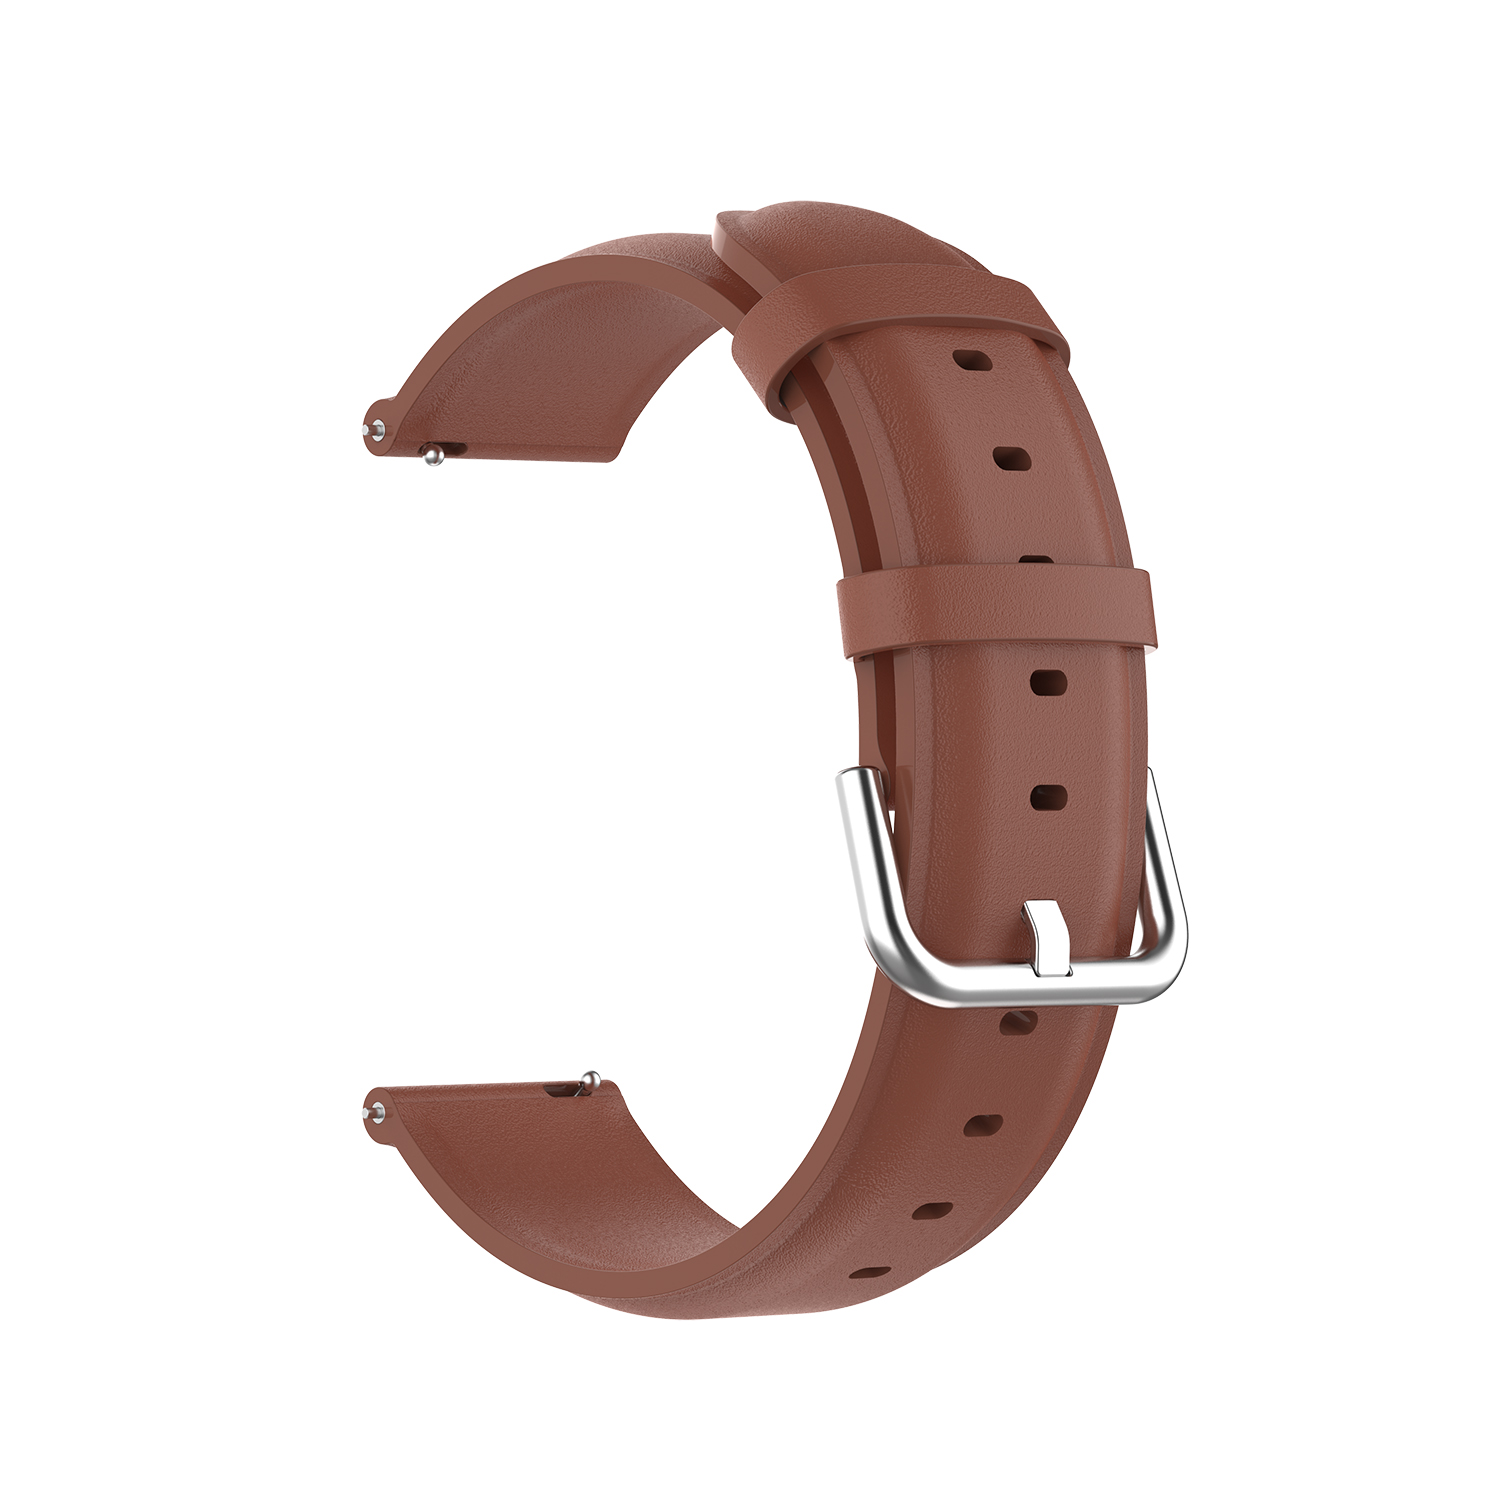 Bakeey-2022mm-Width-Universal-Casual-PU-Leather-Watch-Band-Strap-Replacement-for-Samsung-Galaxy-watc-1734852-13